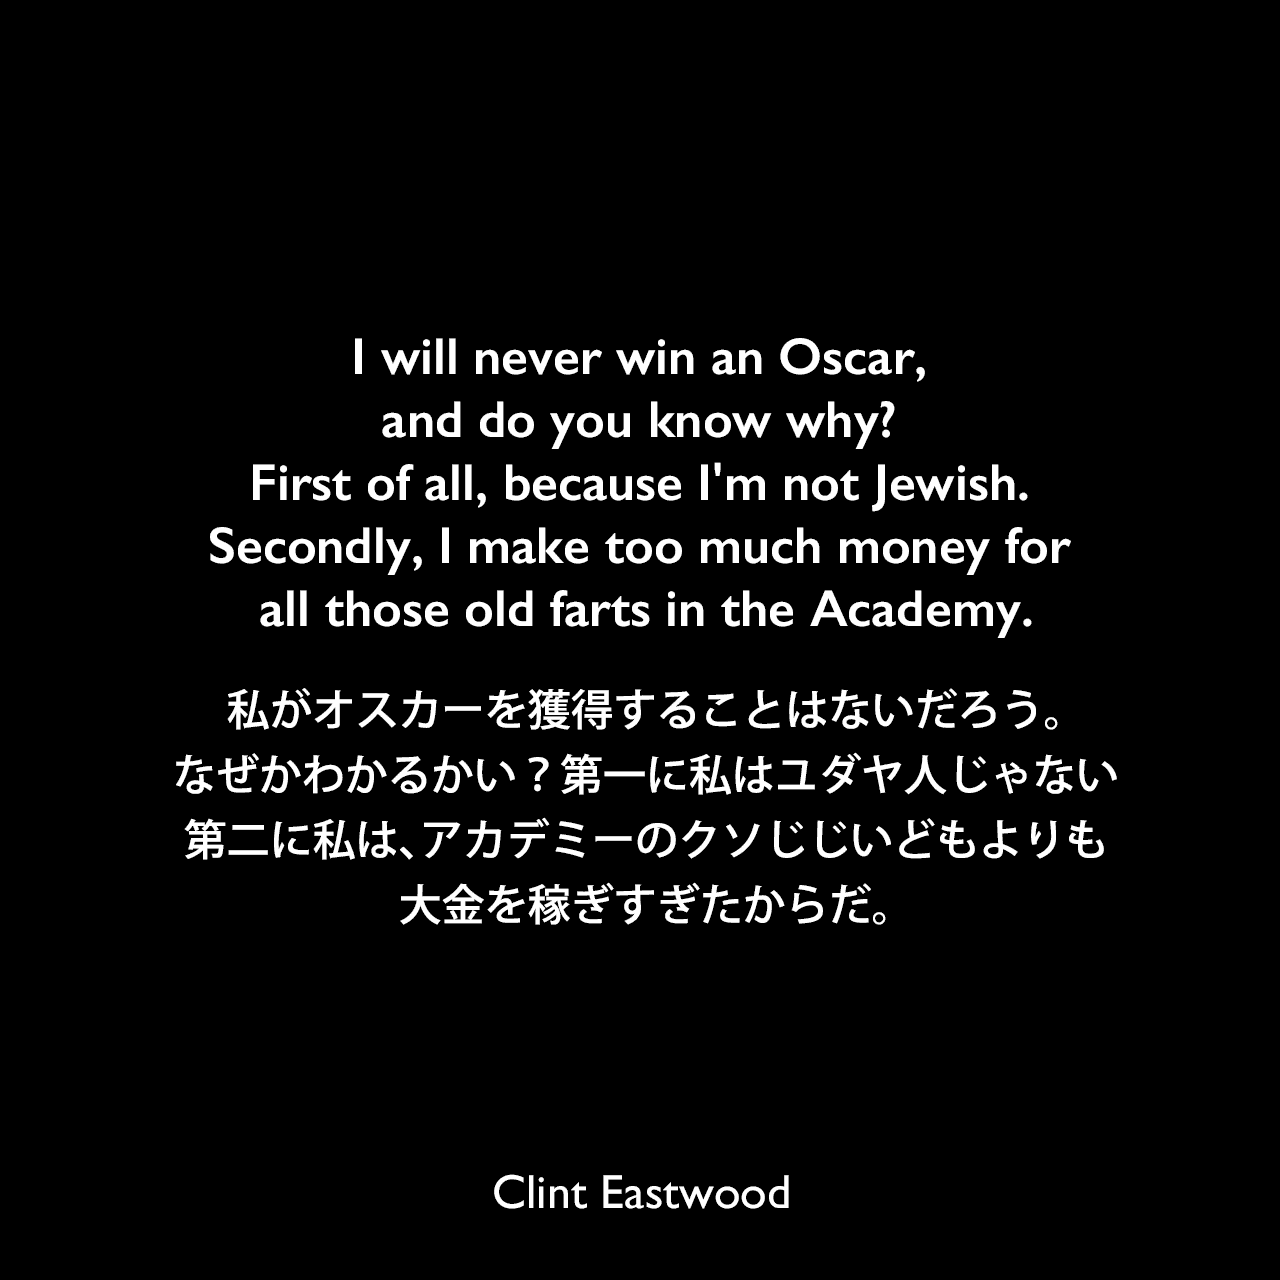 I will never win an Oscar, and do you know why? First of all, because I'm not Jewish. Secondly, I make too much money for all those old farts in the Academy.私がオスカーを獲得することはないだろう。なぜかわかるかい？第一に私はユダヤ人じゃない、第二に私は、アカデミーのクソじじいどもよりも大金を稼ぎすぎたからだ。Clint Eastwood